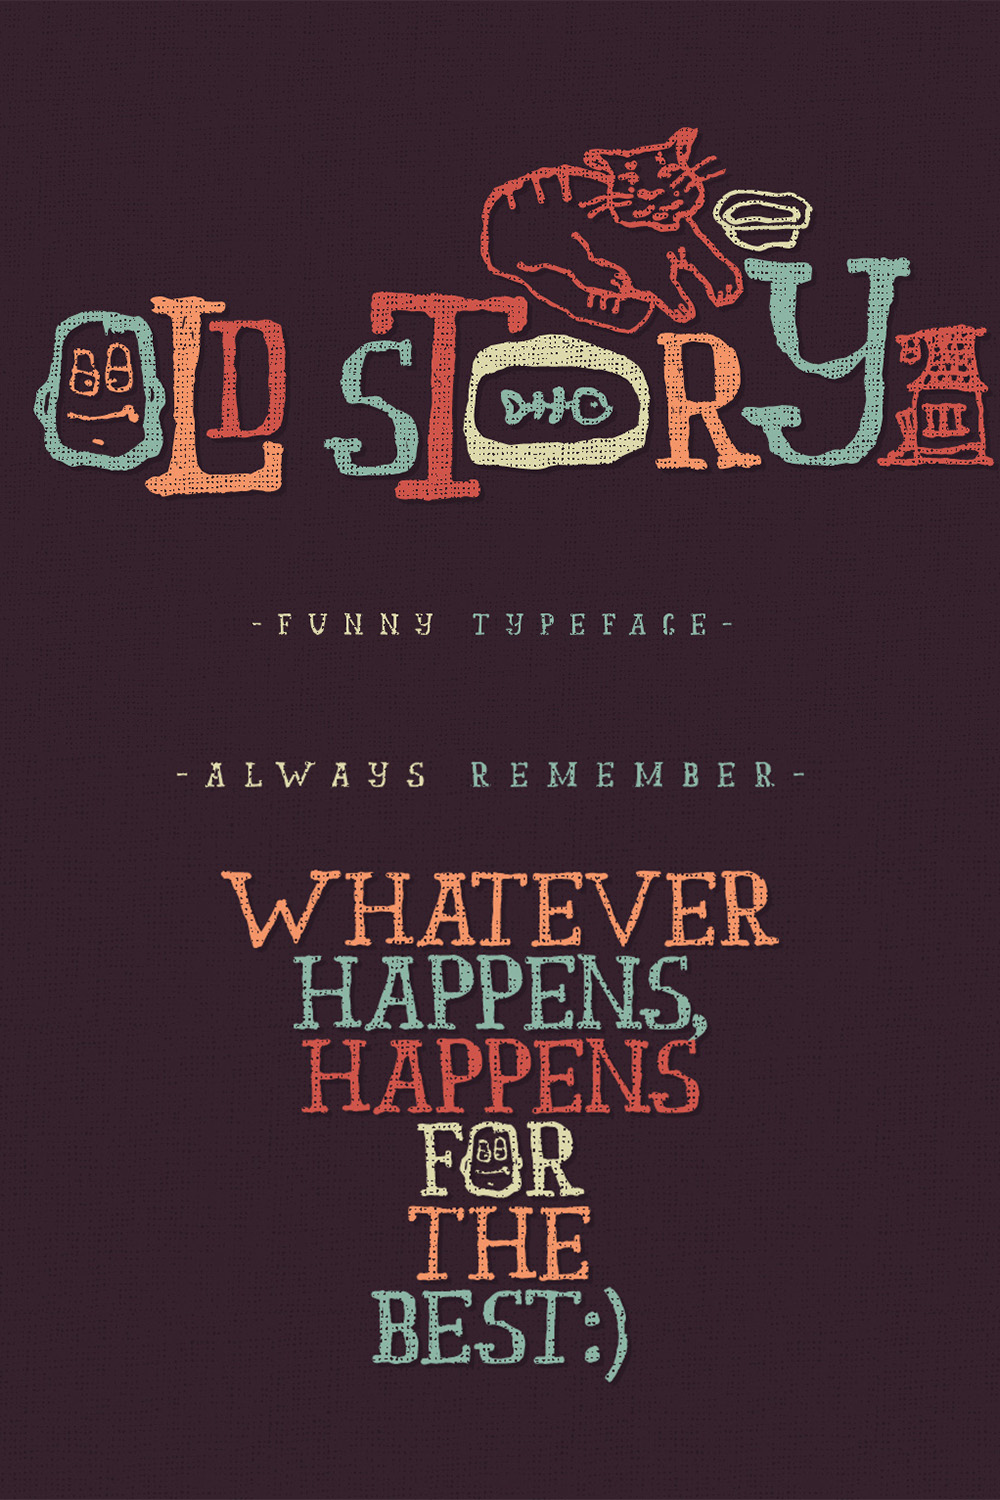 Old Story Typeface Pinterest collage image.